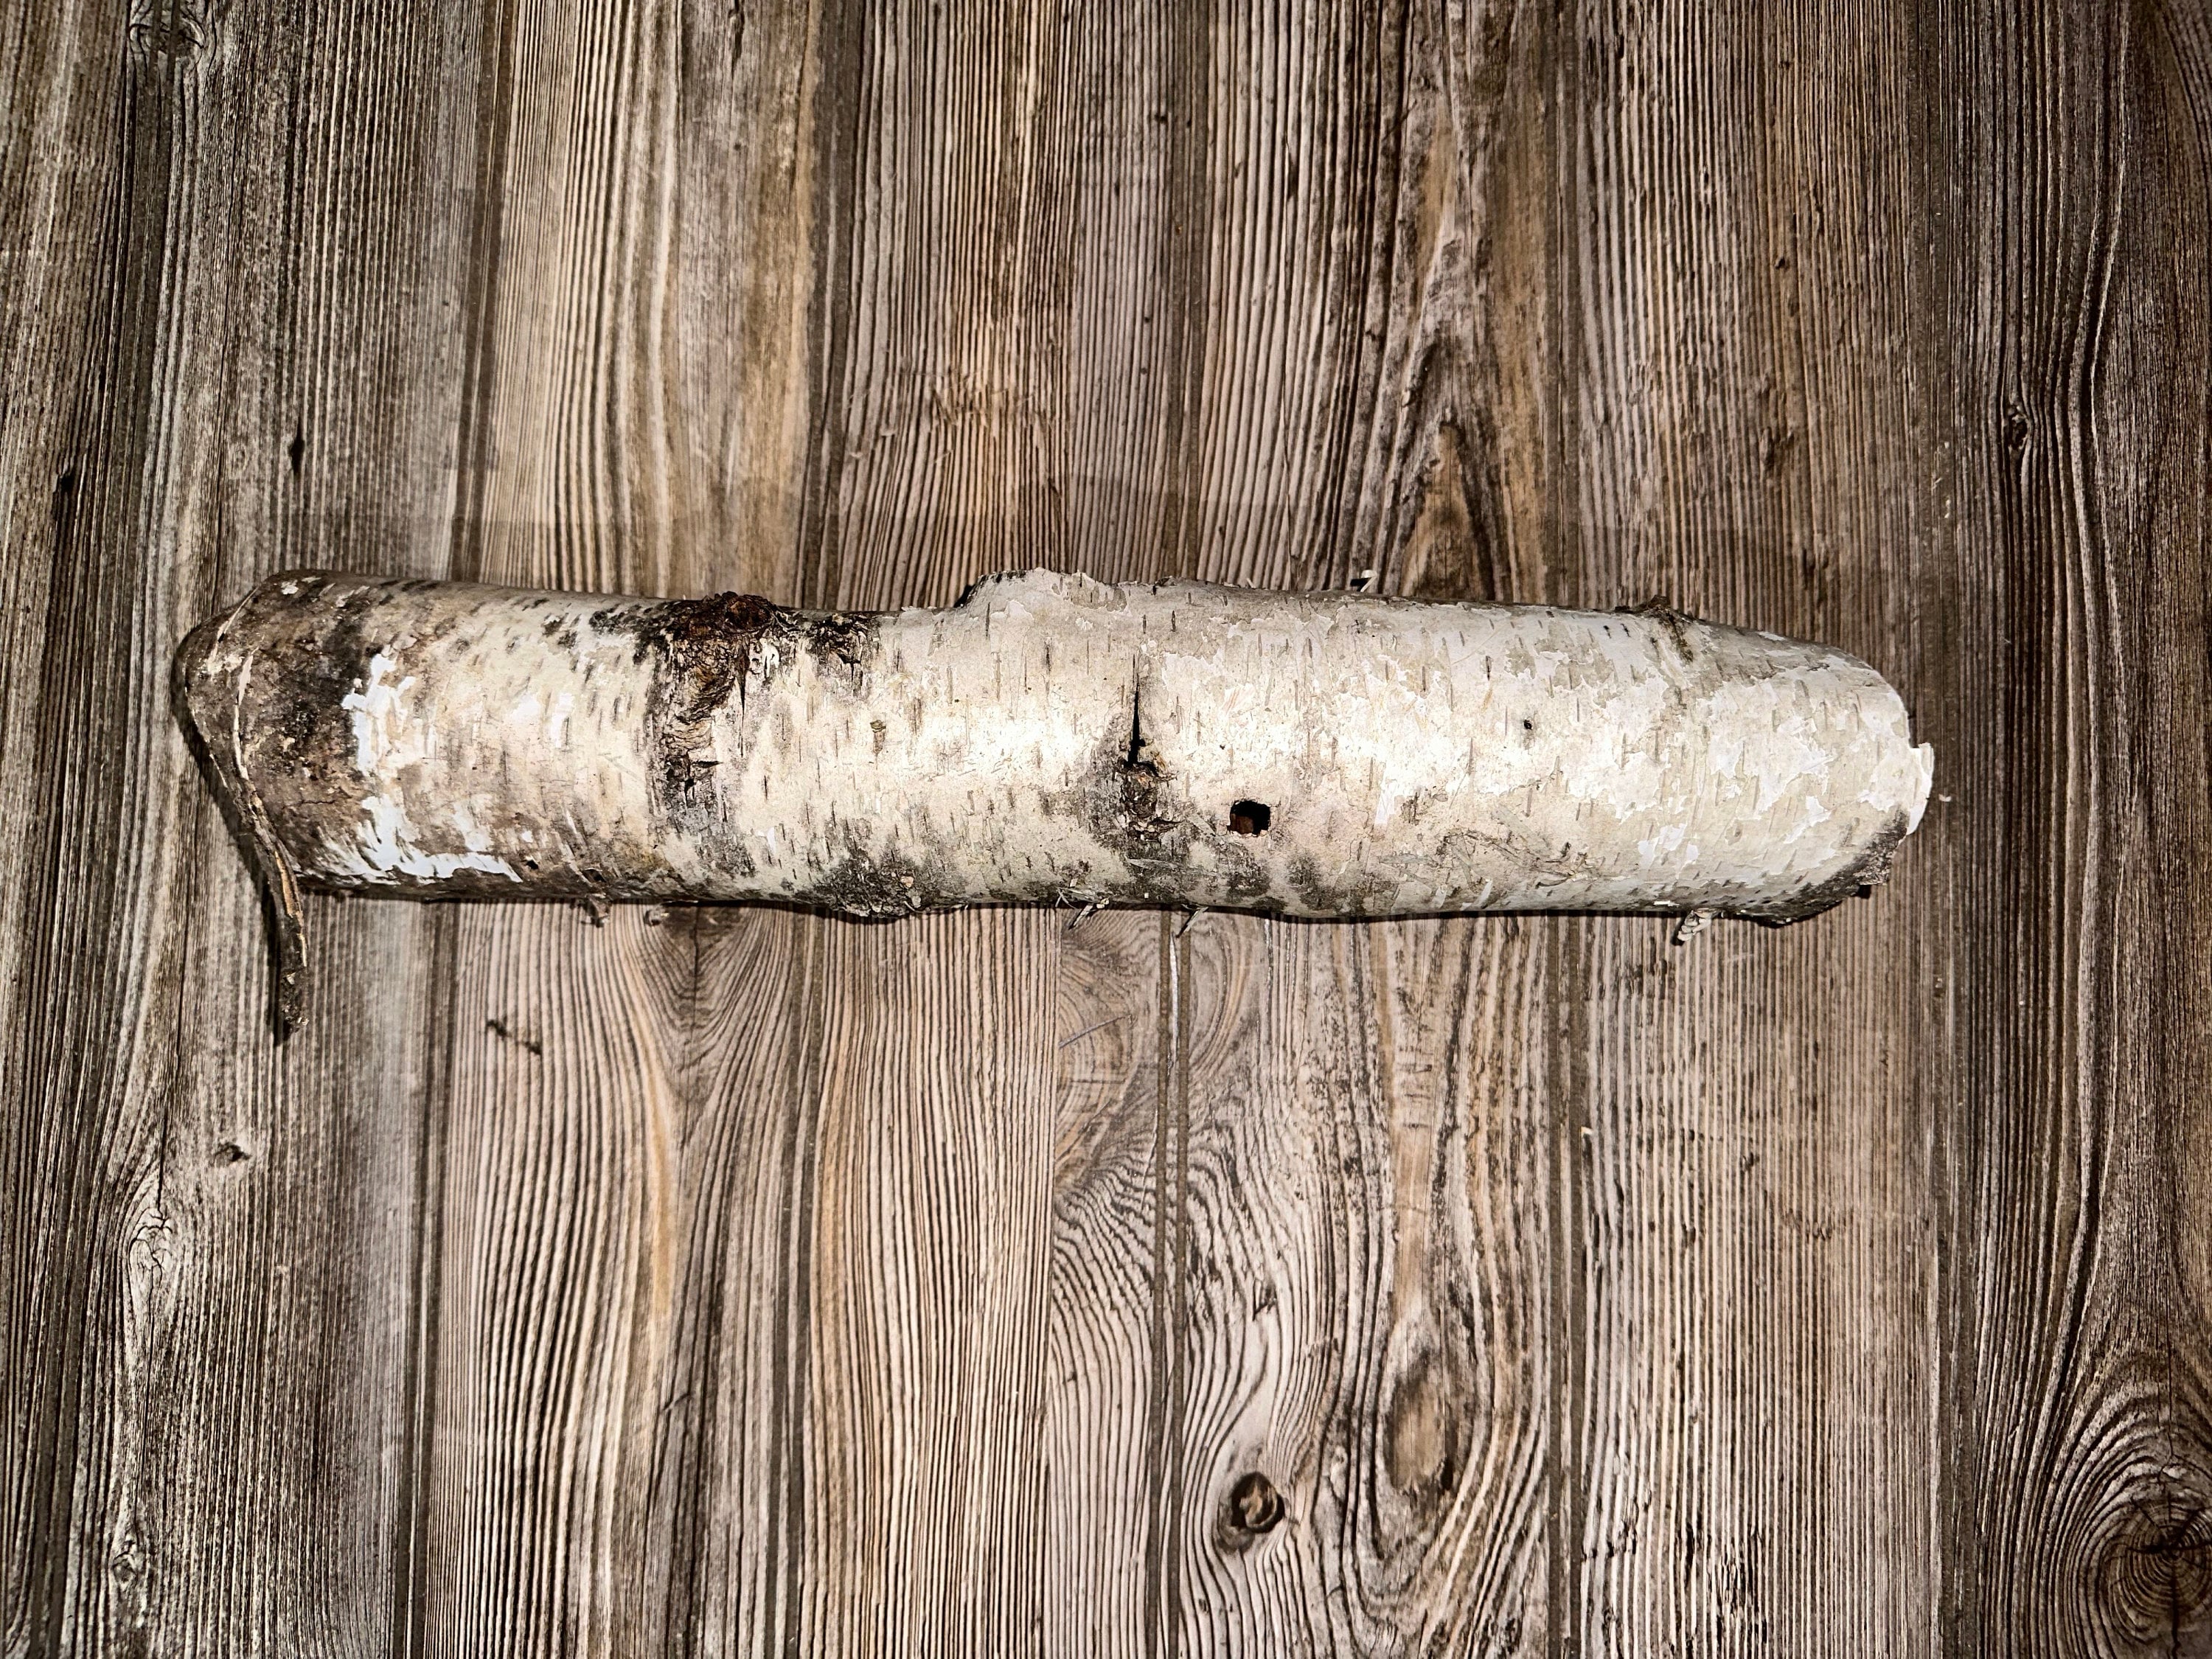 White Birch Bark Tube With Natural Woodpecker Holes, Approximately 15 Inches Long by 3 Inches Wide and 2.5 Inches High